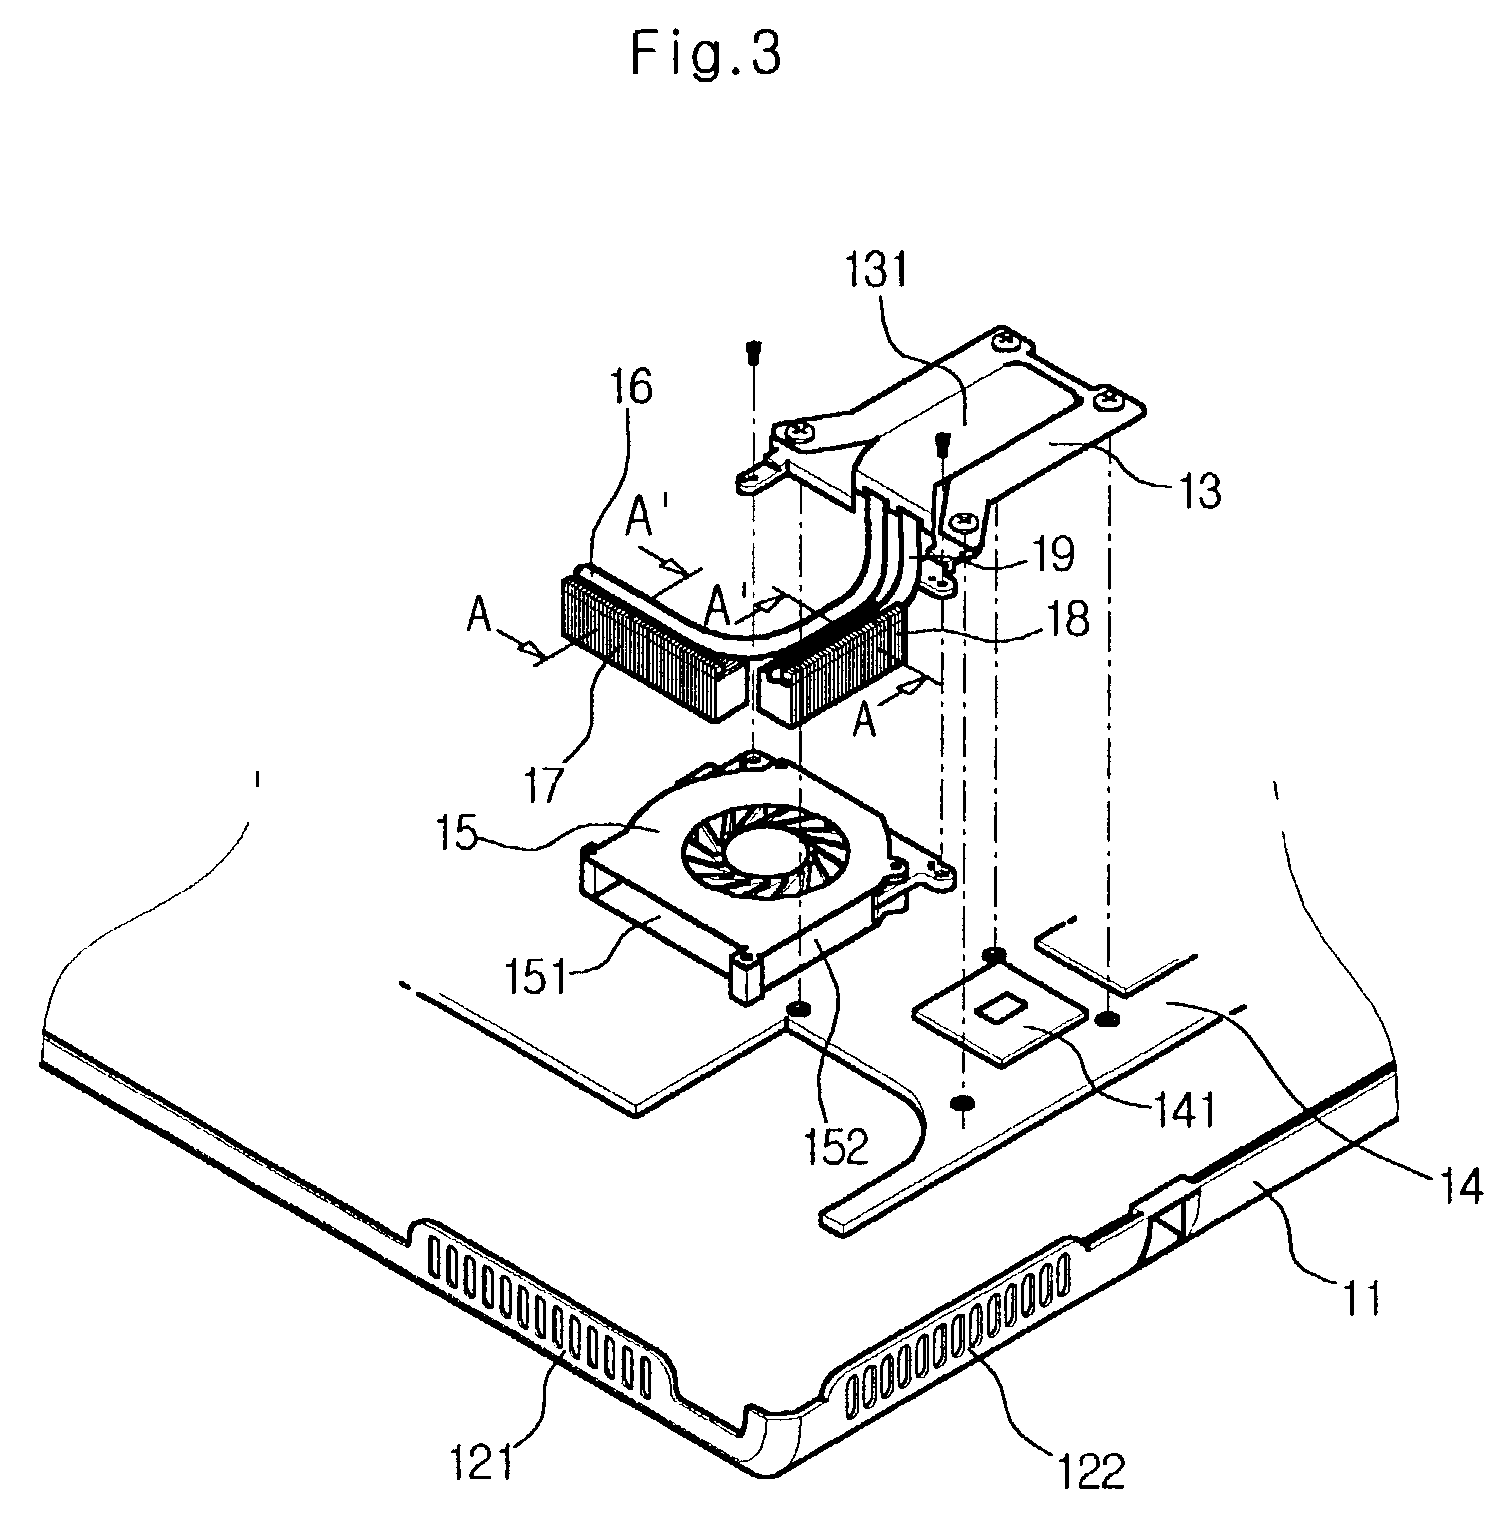 Cooler of notebook personal computer and fabrication method thereof